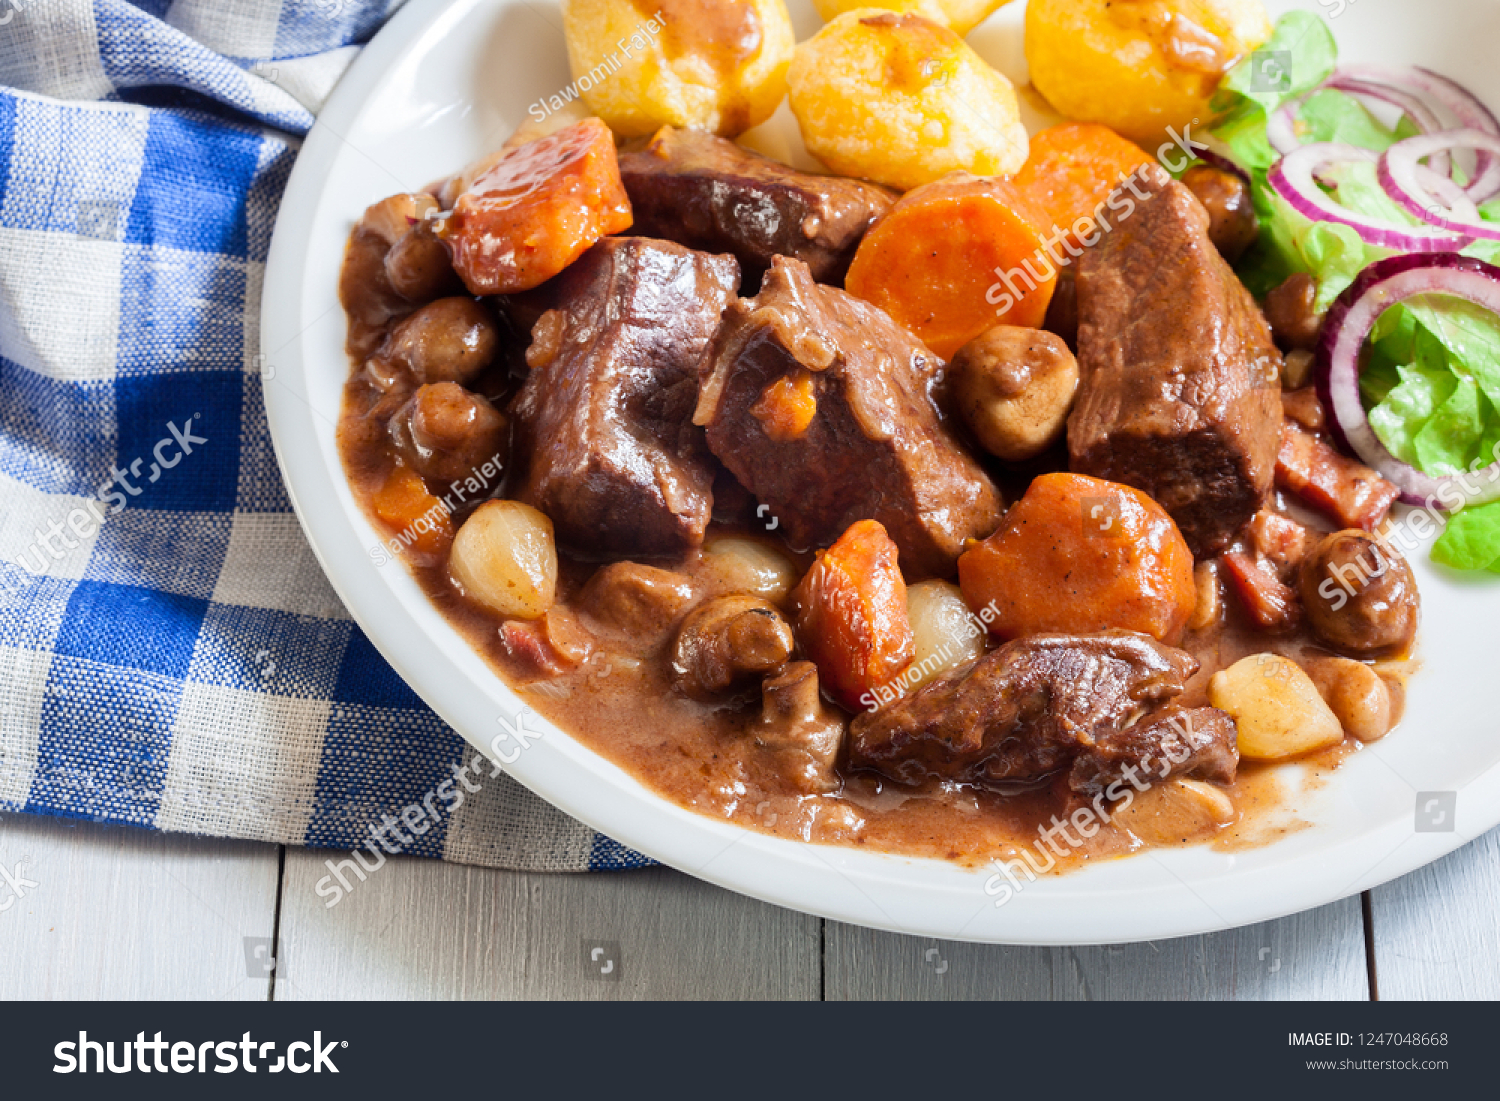 Beef Bourguignon stew served with baked potatoes on a plate. French cuisine #1247048668